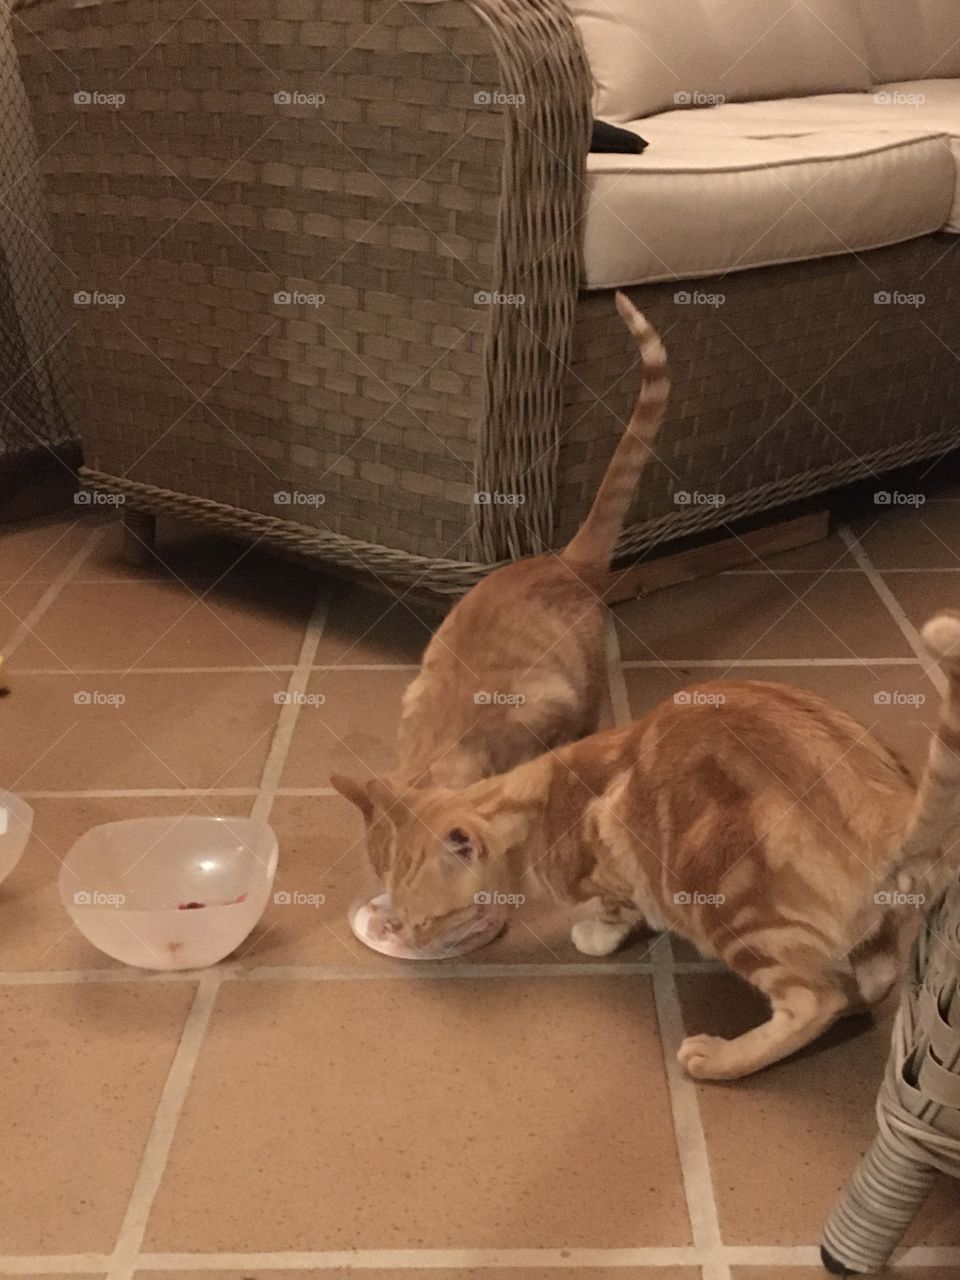 Mommy cat and junior eating together